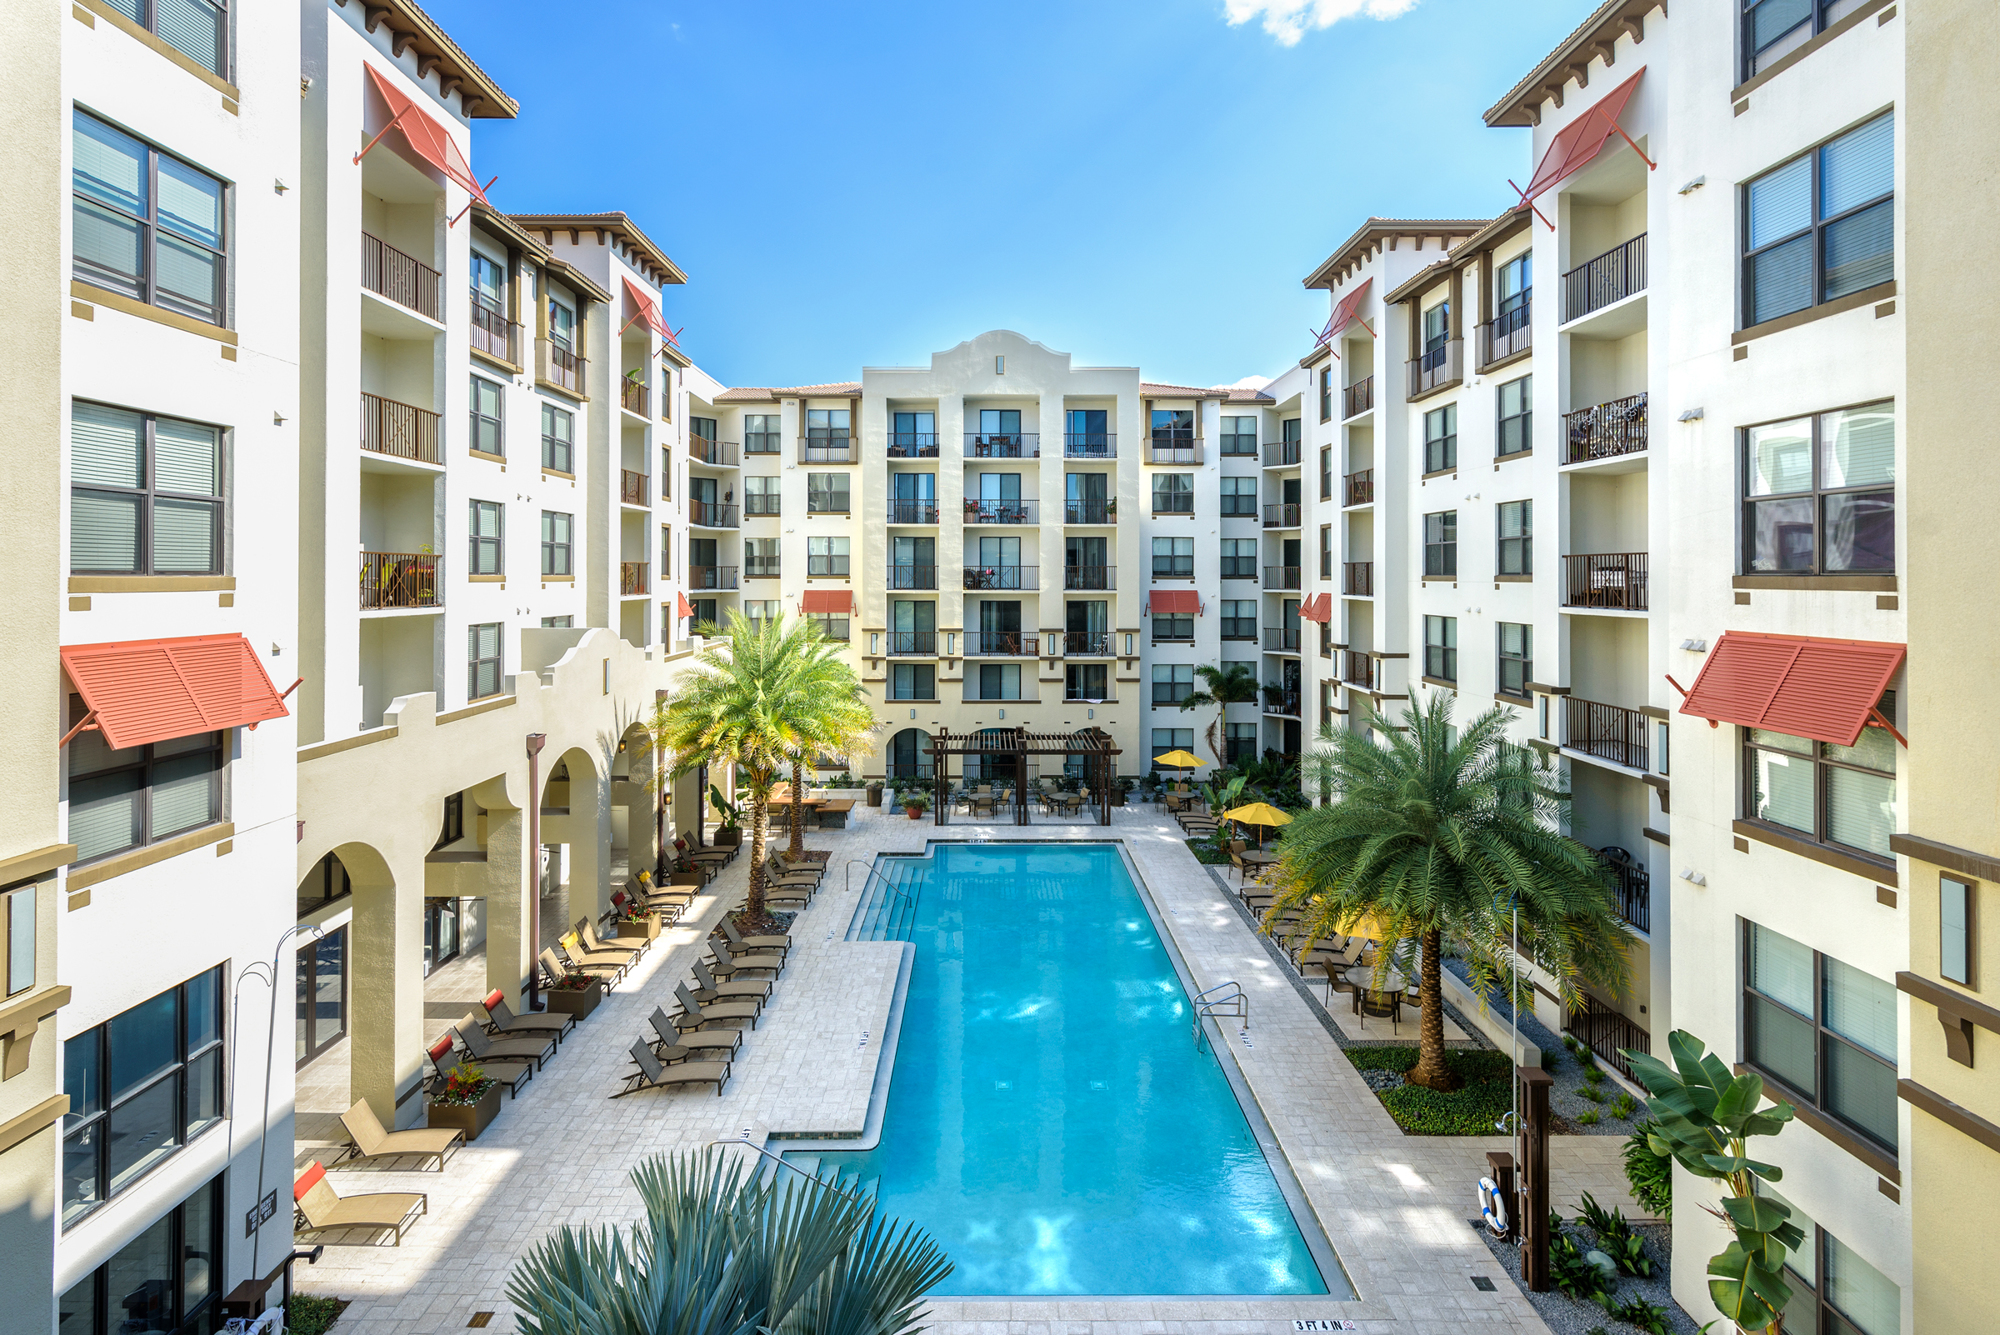 Lantower Residential's 300-unit Westshore community is one of three apartment projects it owns in Tampa